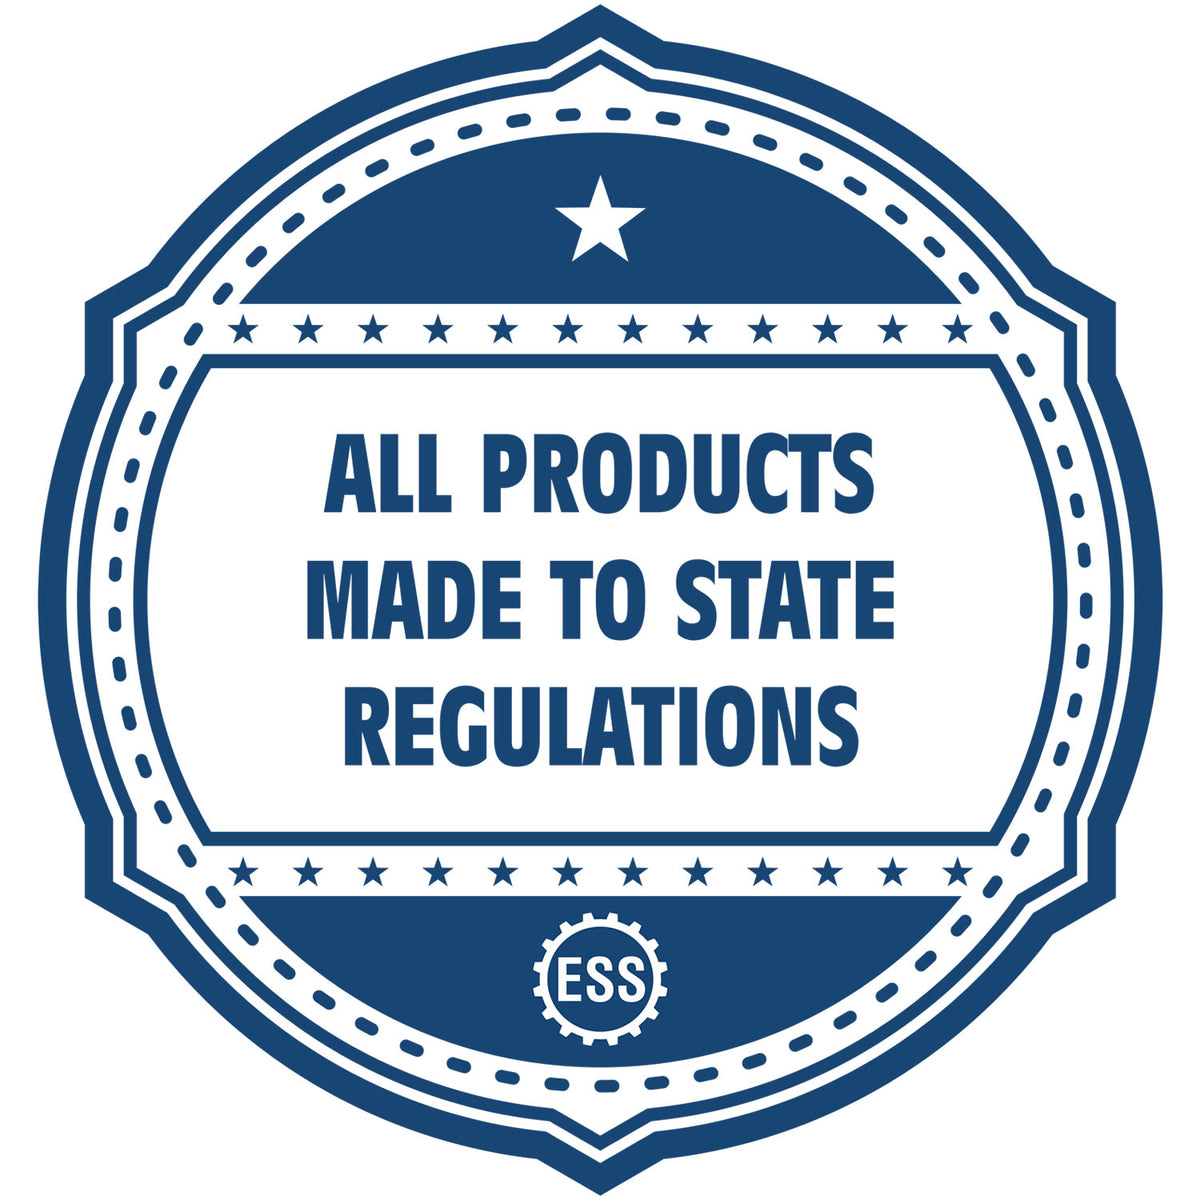 An icon or badge element for the Extended Long Reach Michigan Architect Seal Embosser showing that this product is made in compliance with state regulations.